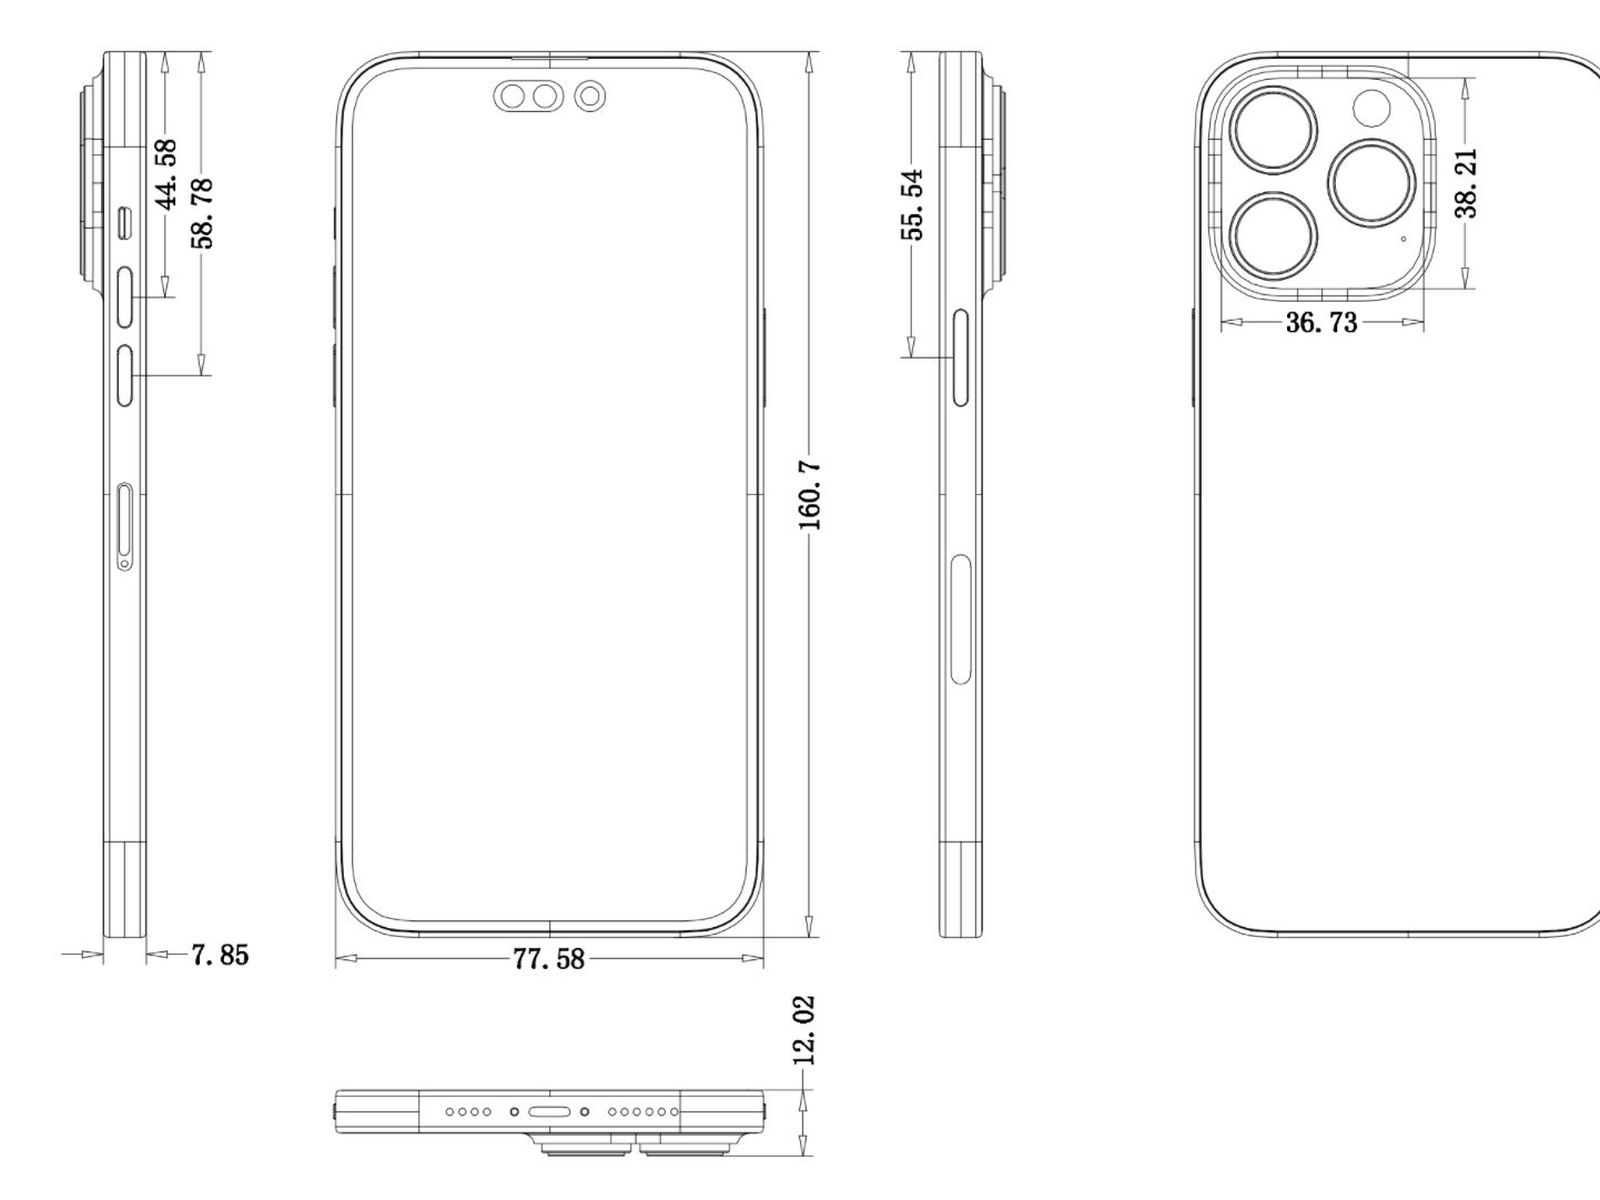 iPhone 14 Pro and iPhone 14 Pro Max Schematics Reveal Larger Camera Bump  and Thicker Overall Design - MacRumors